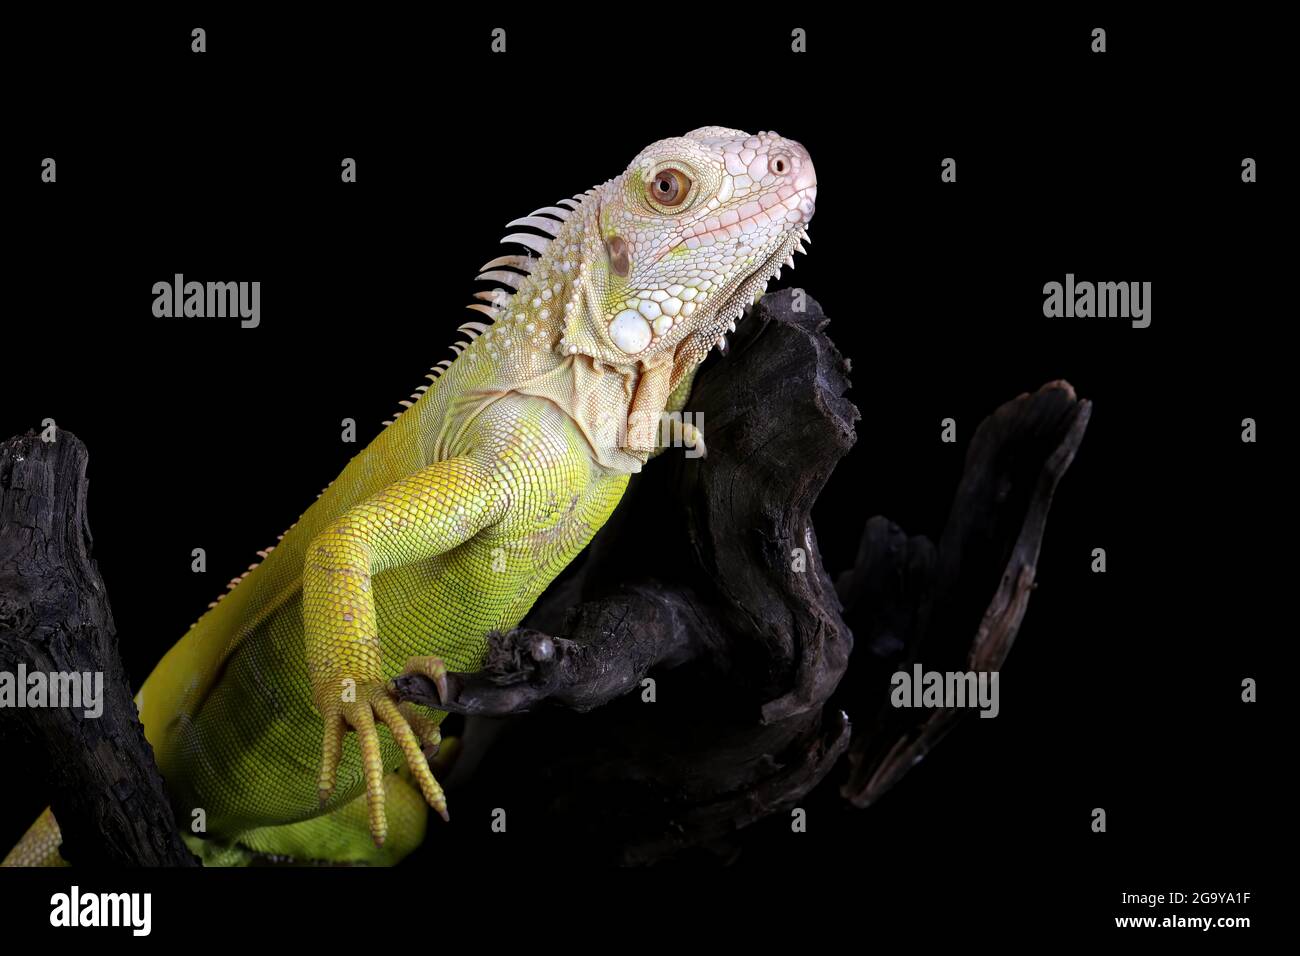 Close-up of an Albino iguana on a branch, Indonesia Stock Photo